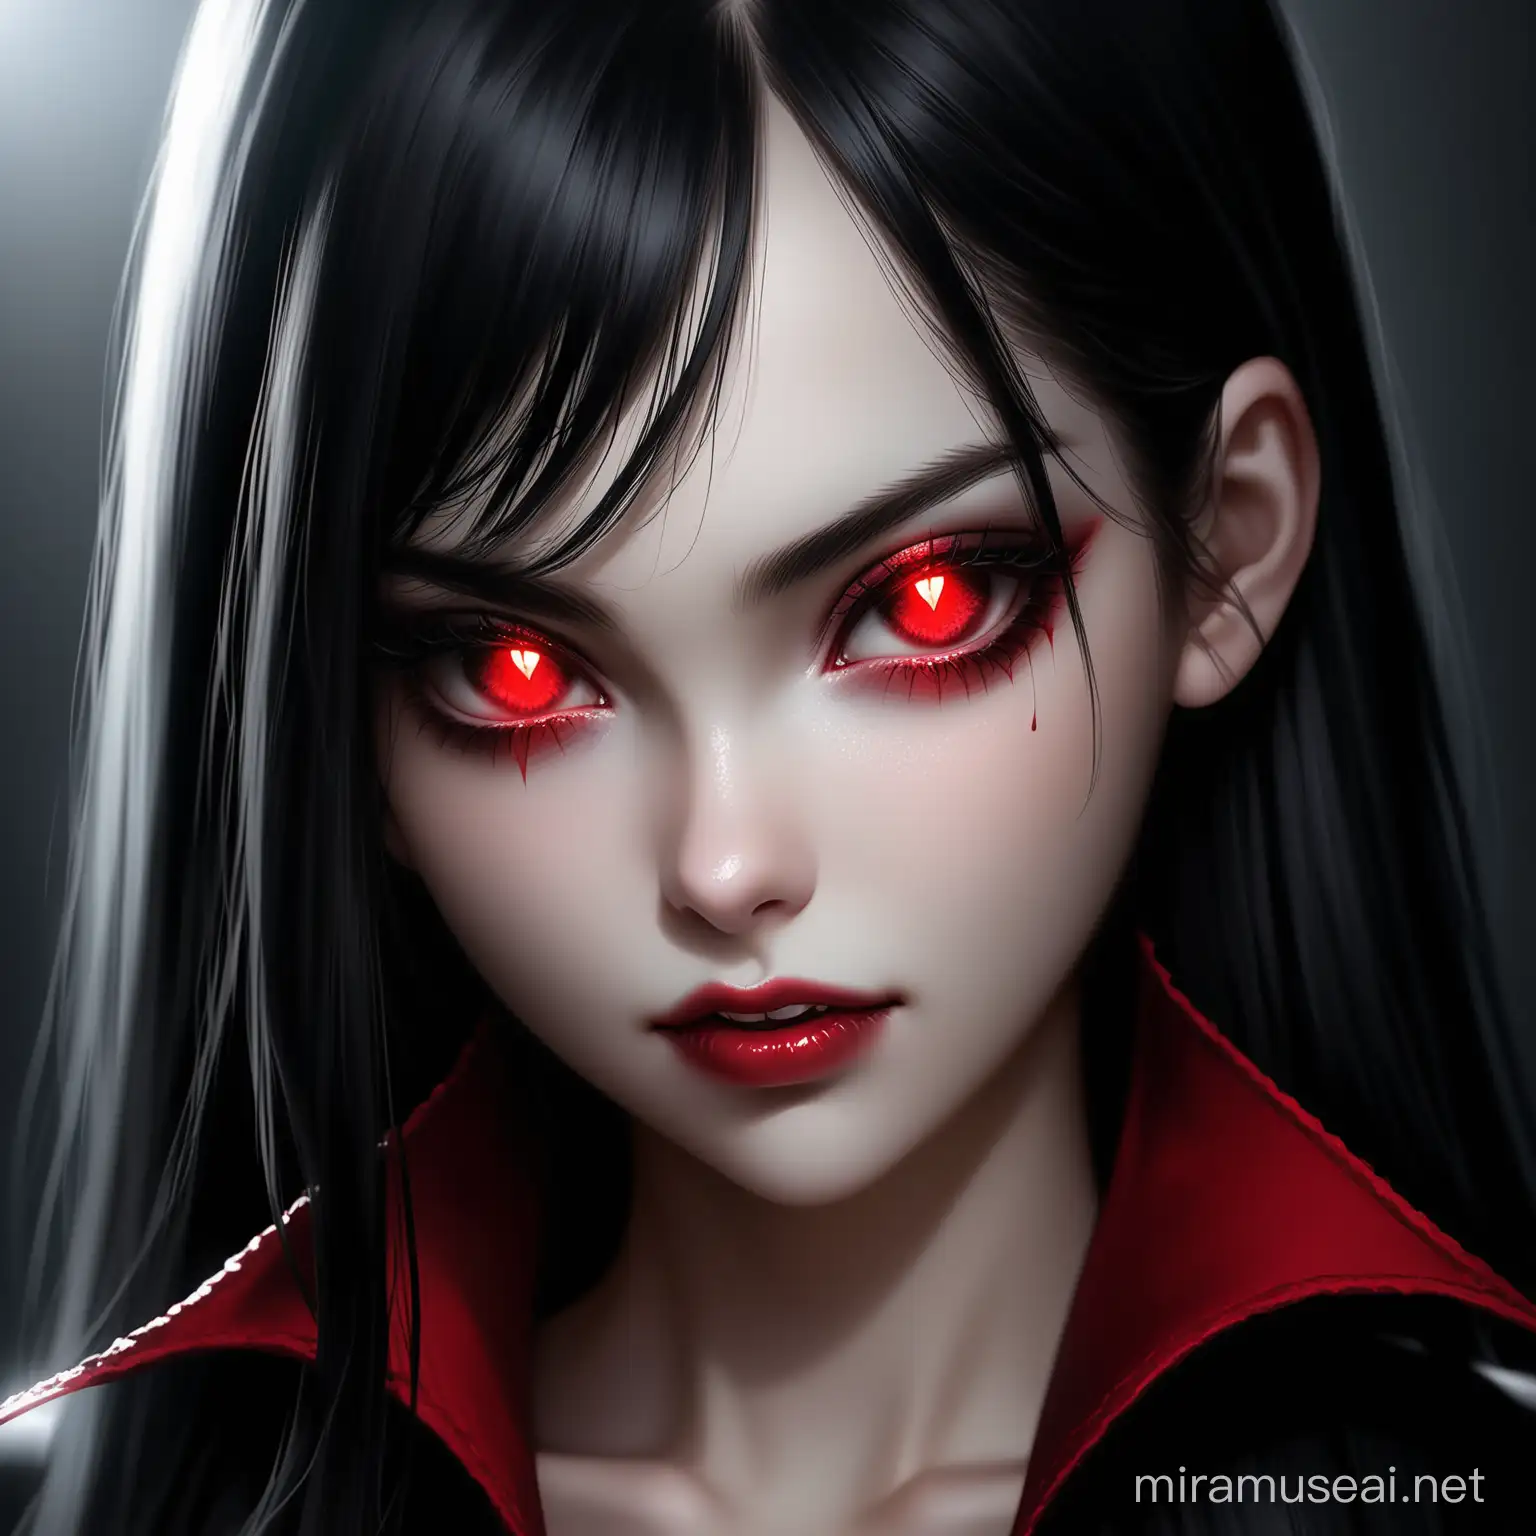 Glamorous Young Vampire Woman with Photorealistic Features and Seductive Gaze